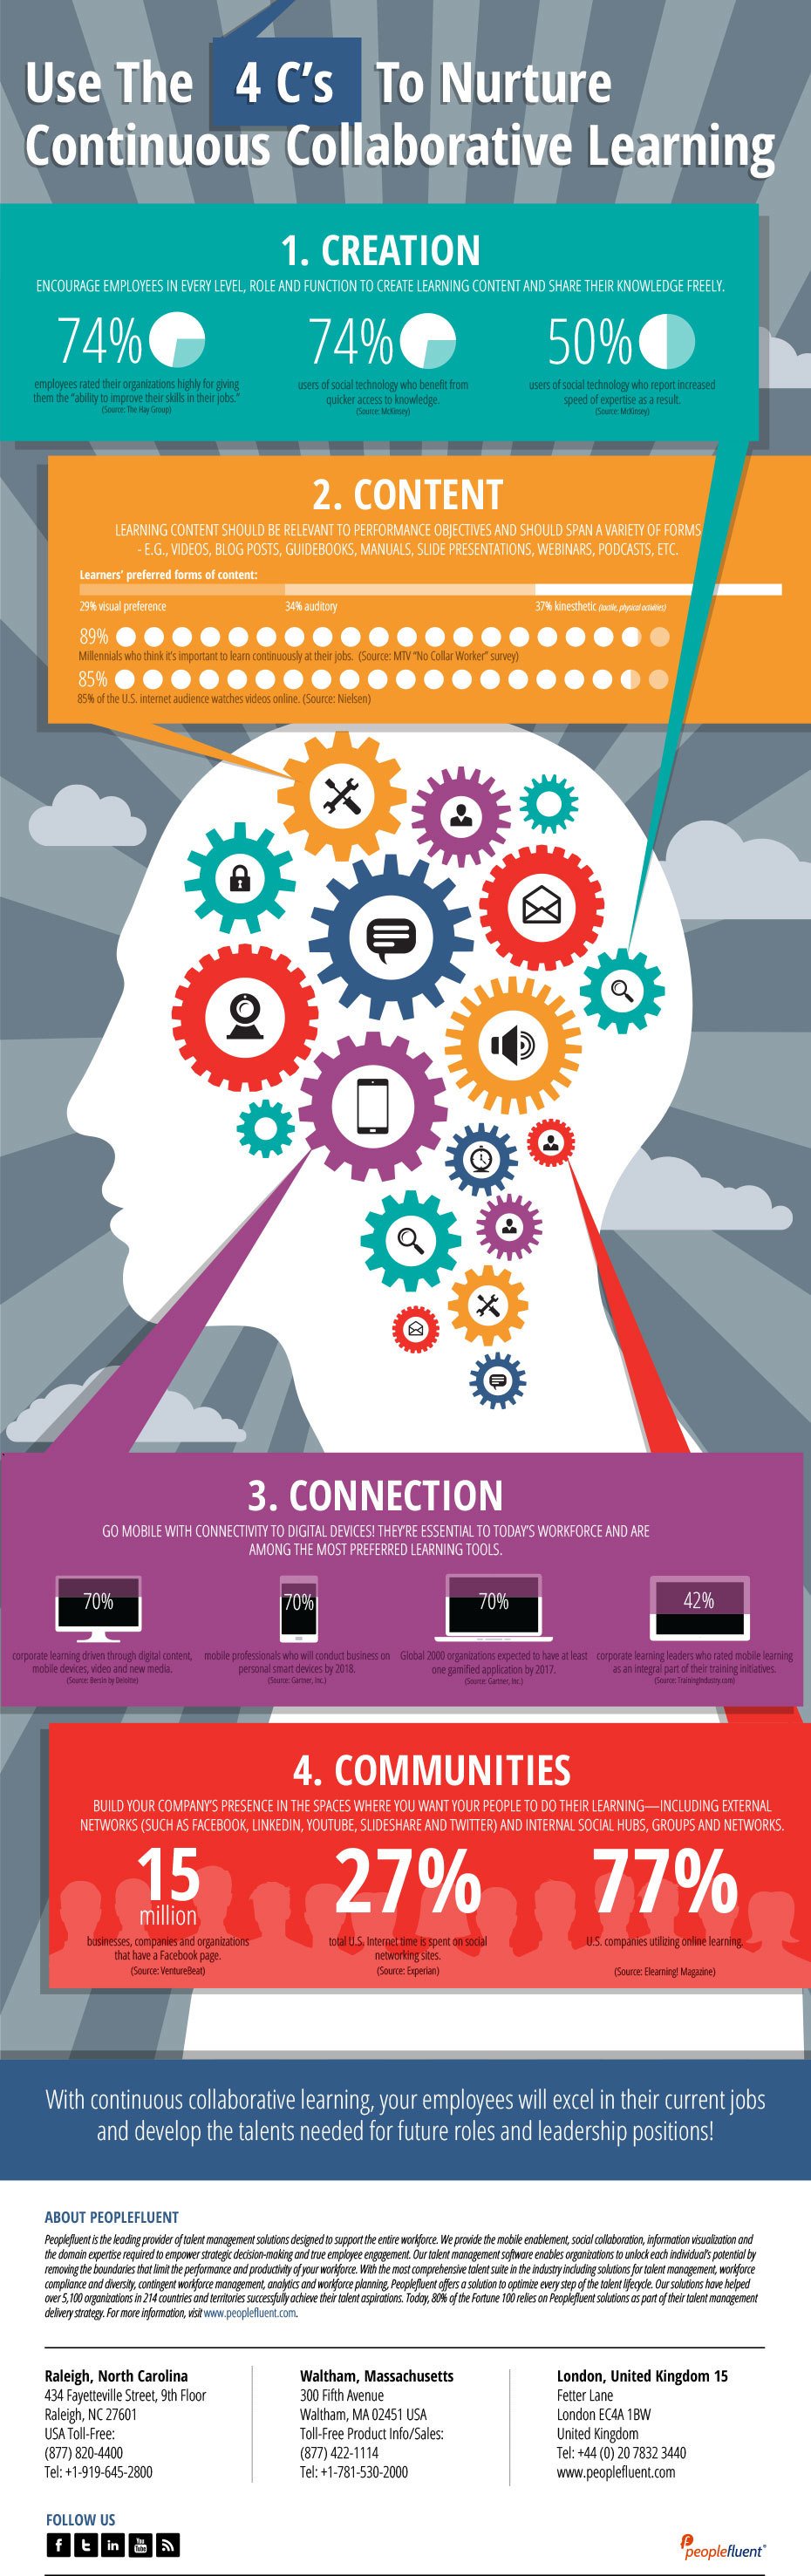 The 4 C’s of Collaborative Learning Infographic